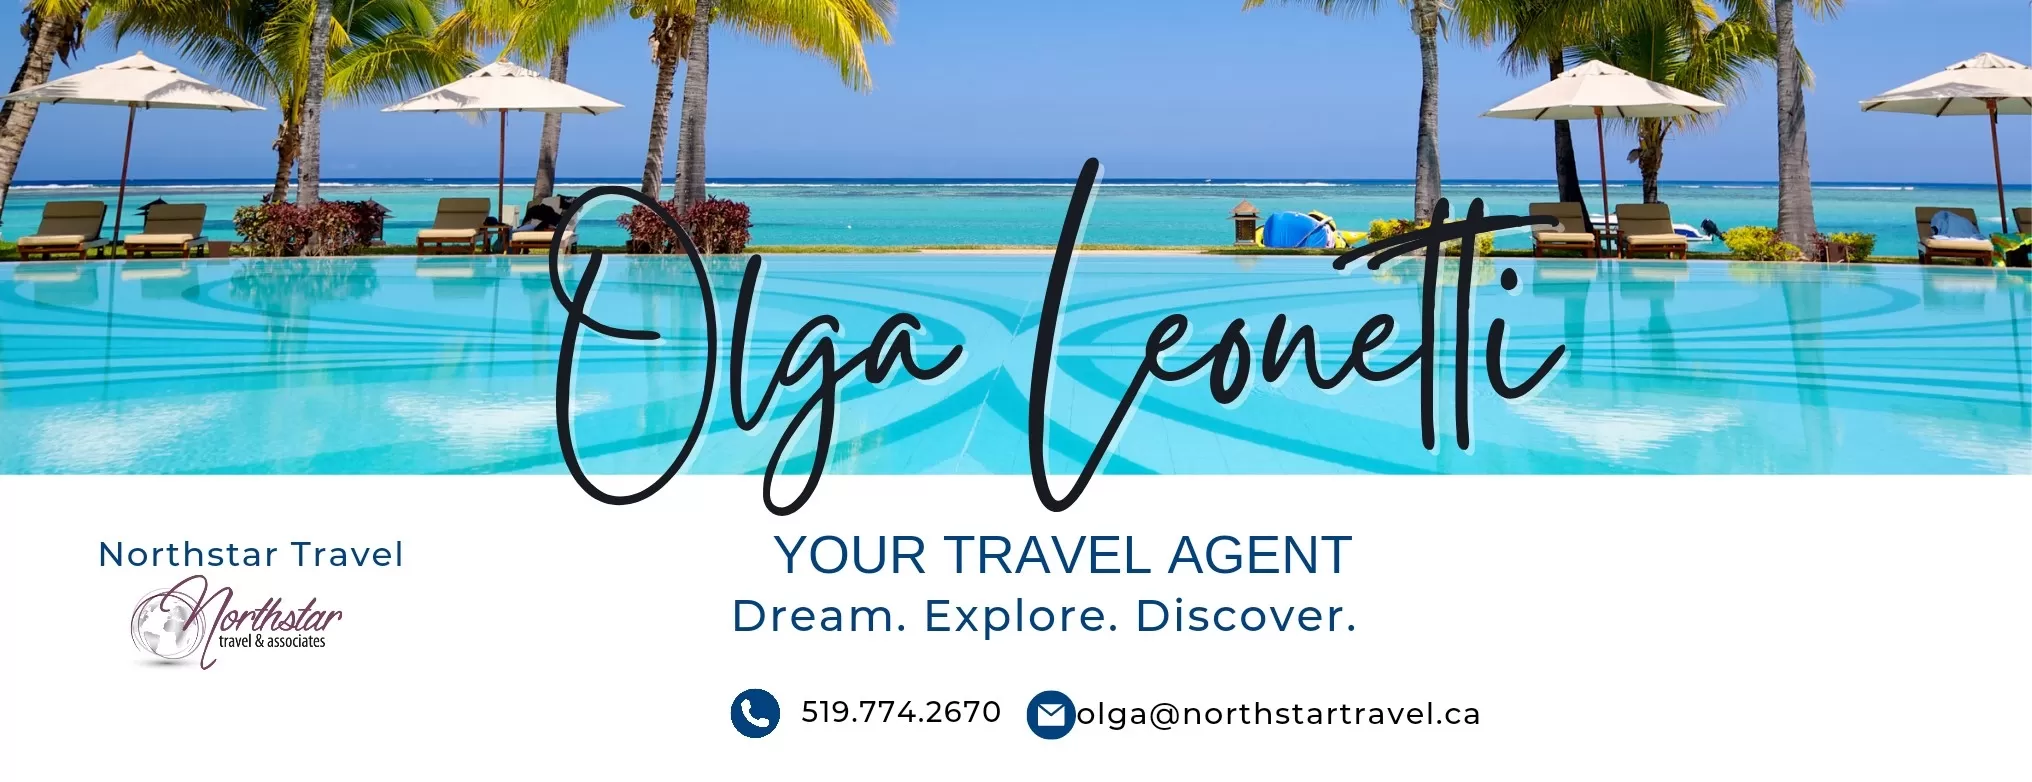 Cover Image of Olga with Northstar Travel